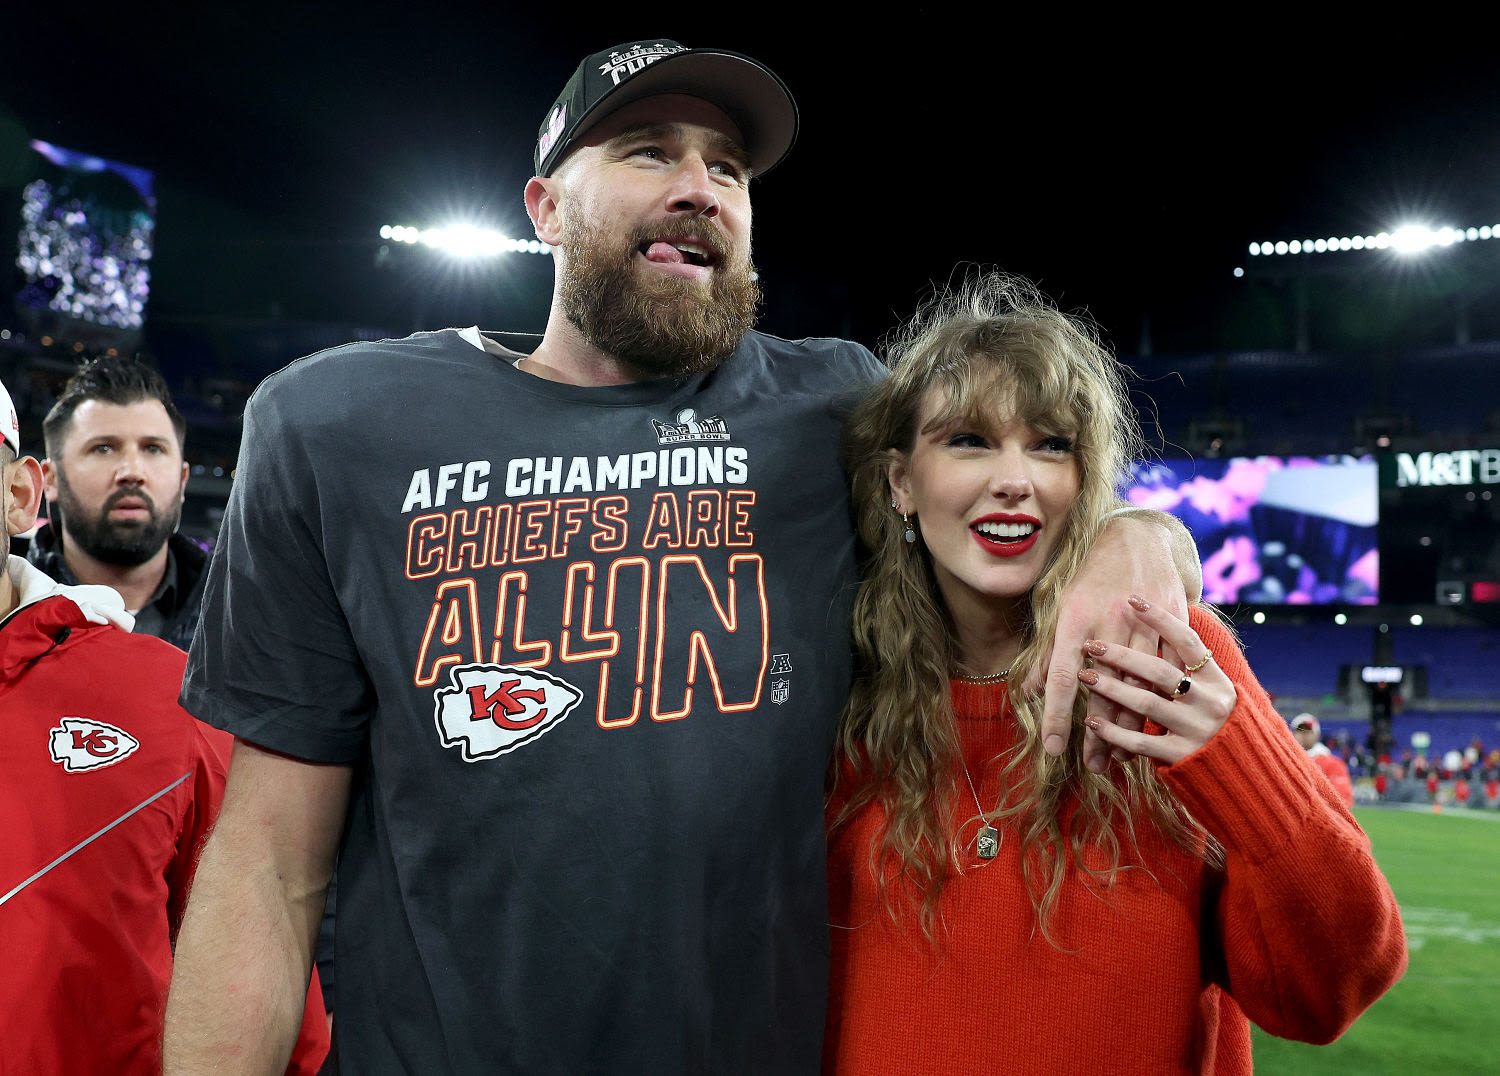 Will Taylor Swift be able to attend Chiefs games this fall? We look at their schedules